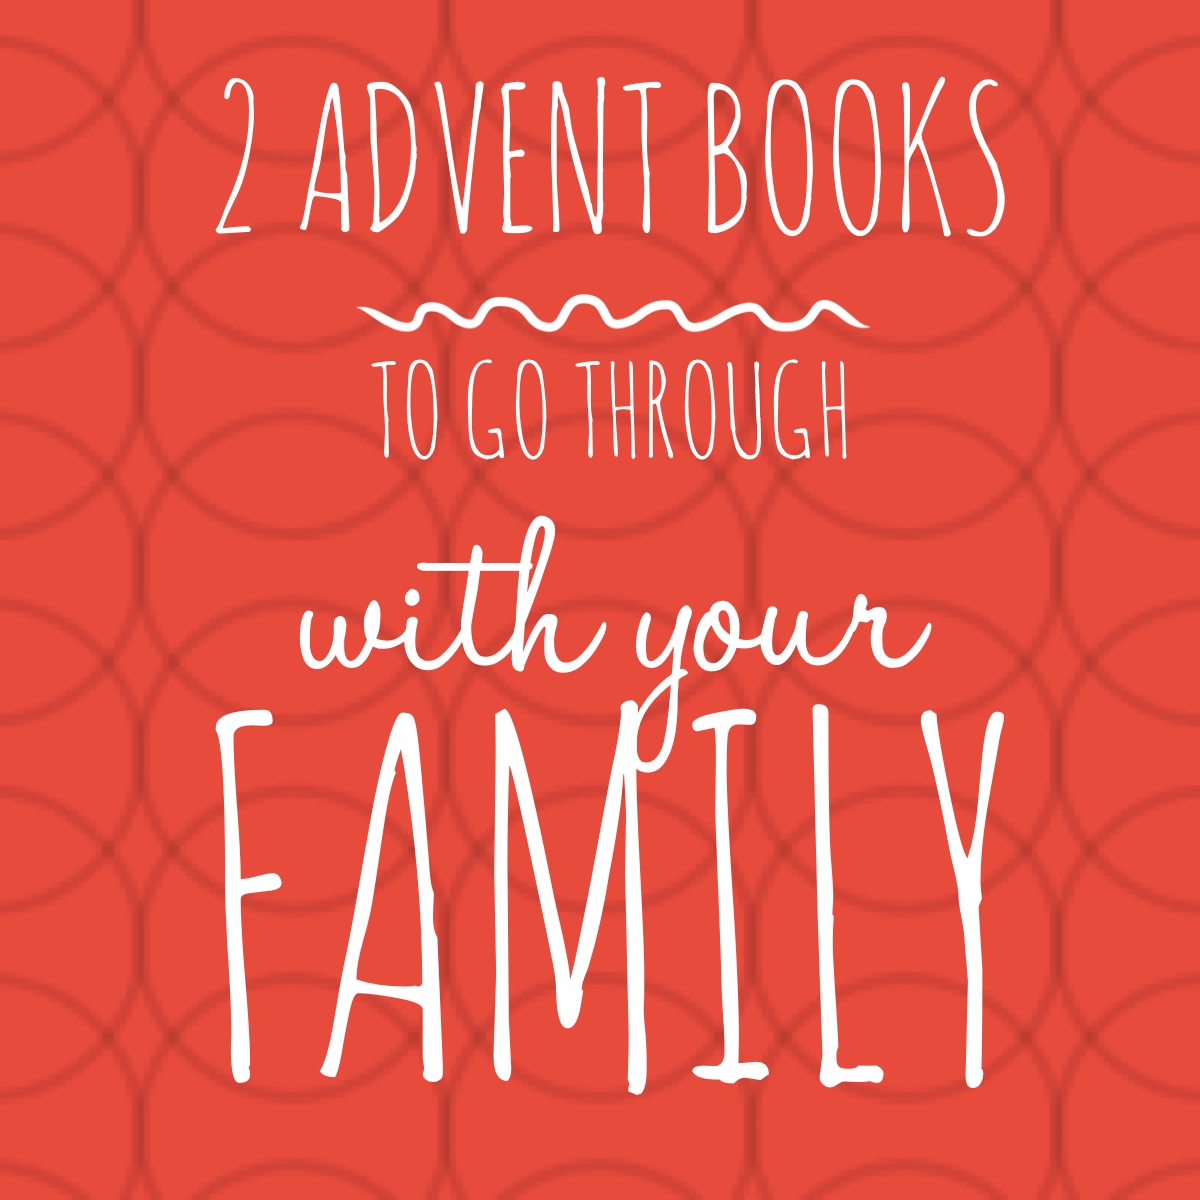 2 Advent Books to go Through With Your Family